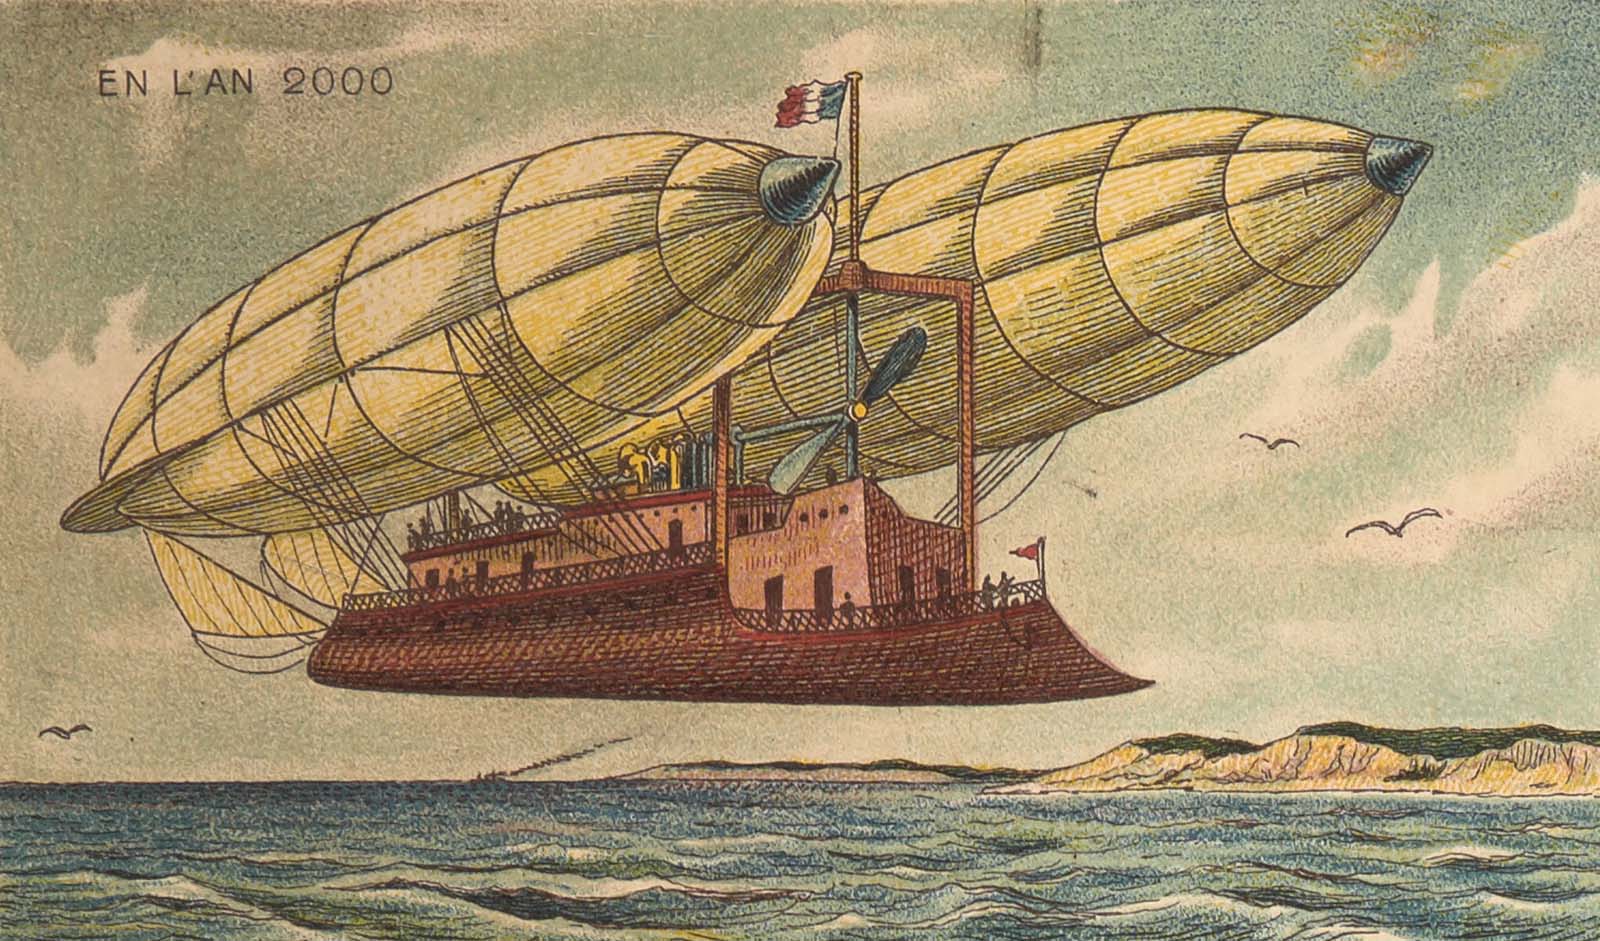 The 19th-century postcards of Jean-Marc Côté that predicted the world in the Year 2000